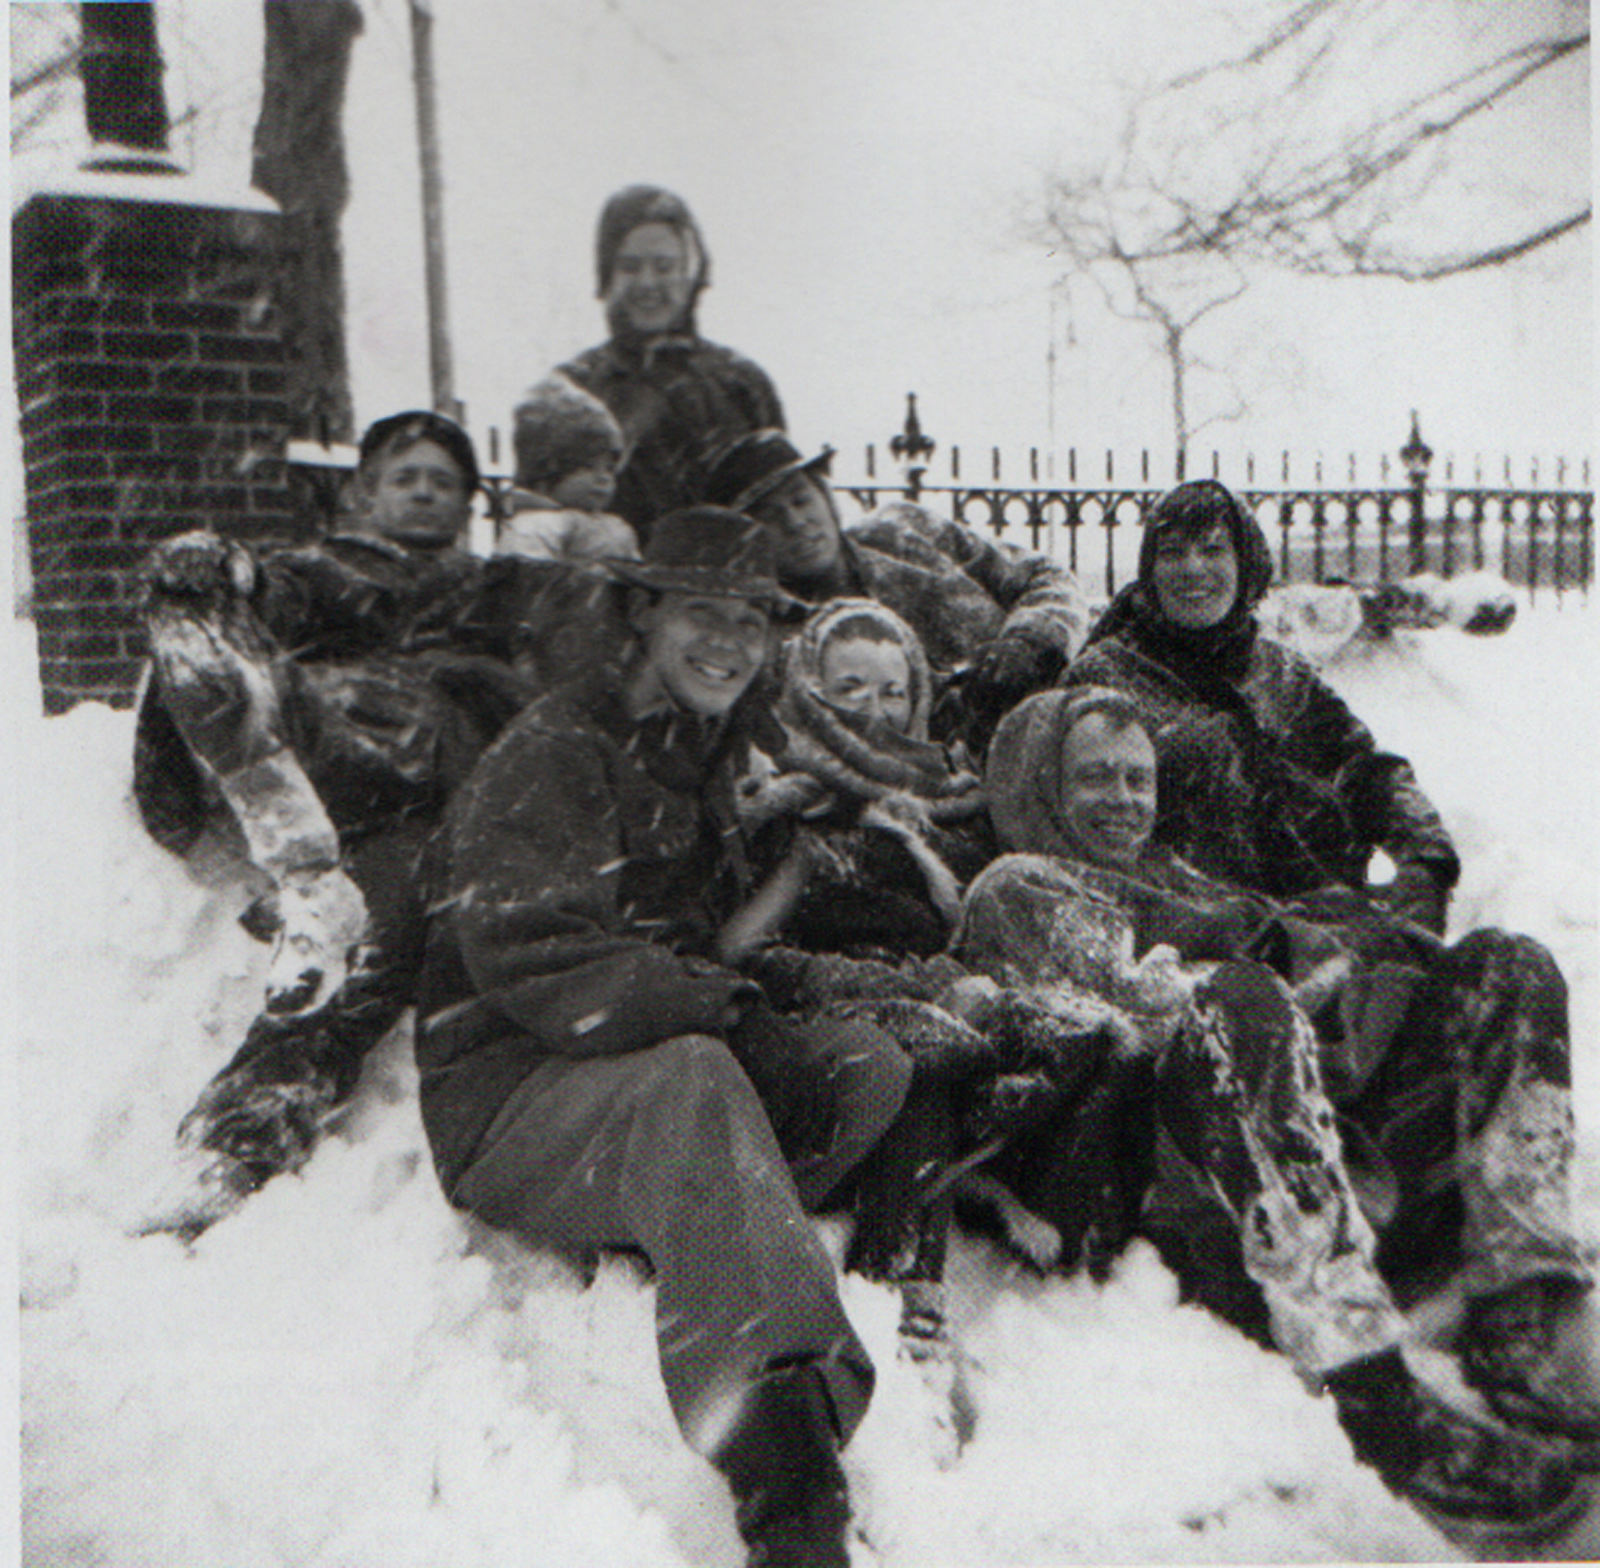 A black and white photograph of Jack Youngerman, Duncan Youngerman, Delphine Seyrig, Jerry Matthews, Dolores Matthews, Ellsworth Kelly, Lenore Tawney, and Robert Clark sitting in the snow in Jeannette Park, New York on February 15, 1958